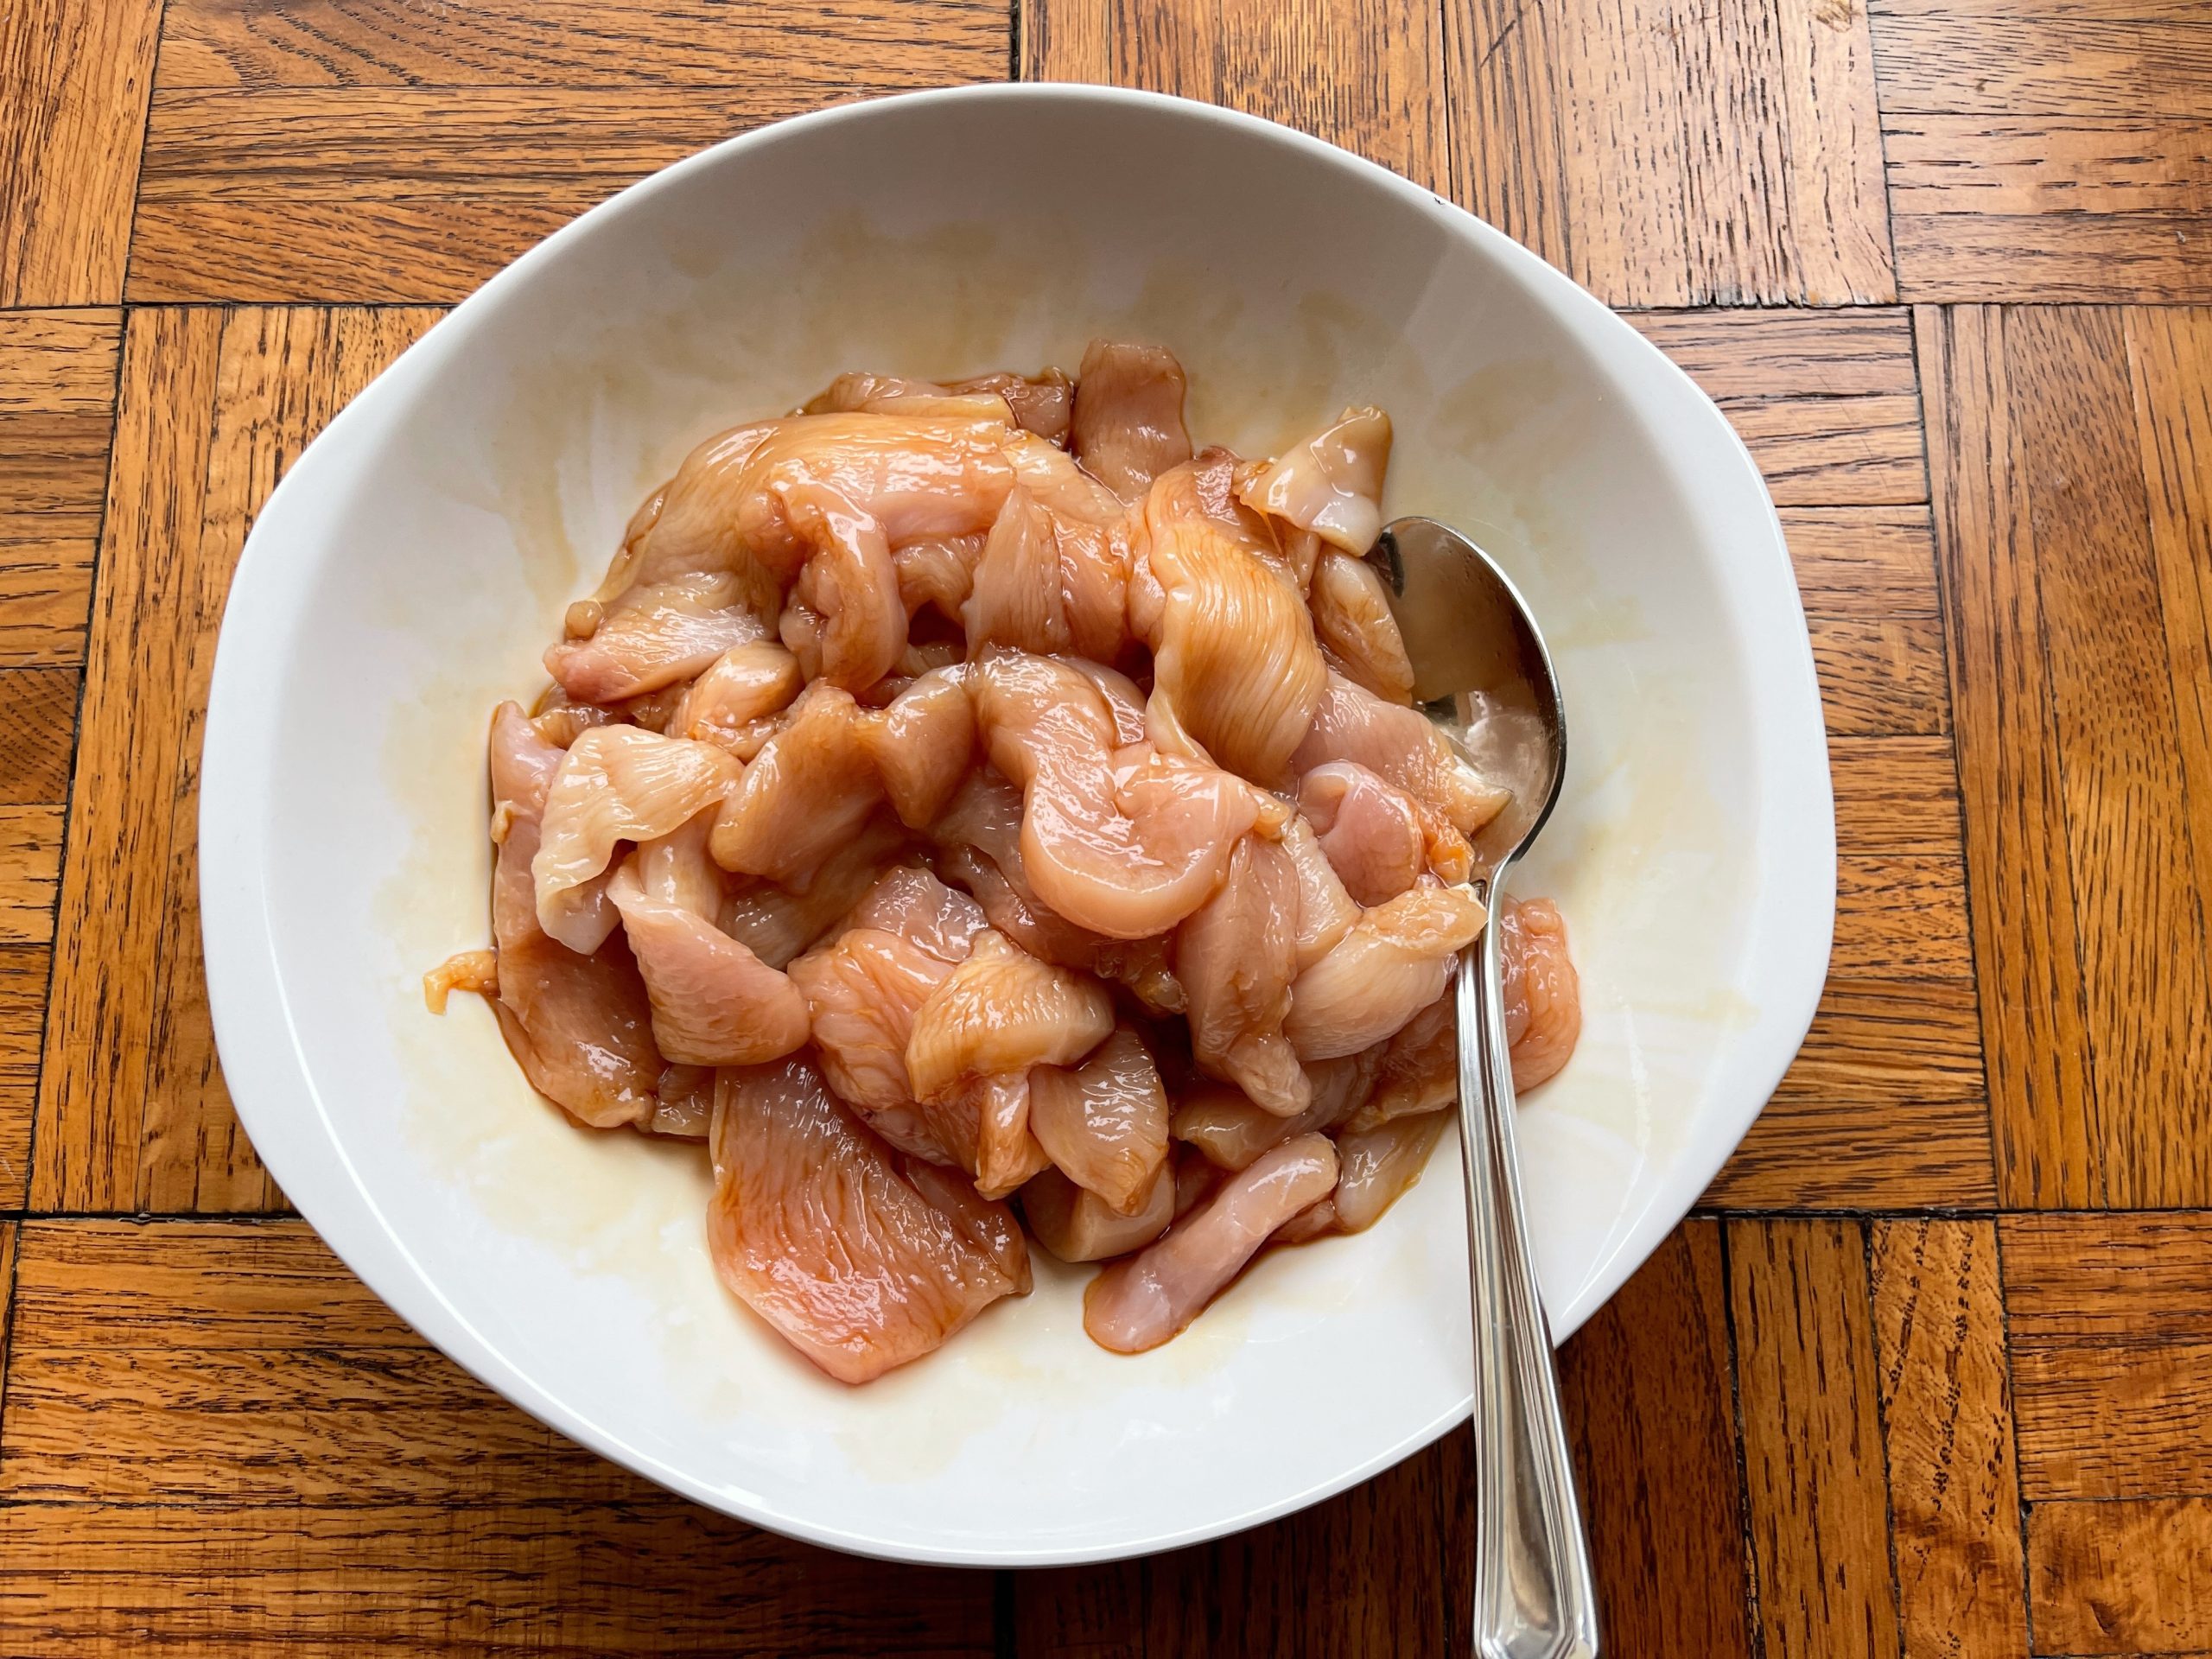 Combine thinly sliced chicken in a medium size bowl with one tablespoon gf soy sauce